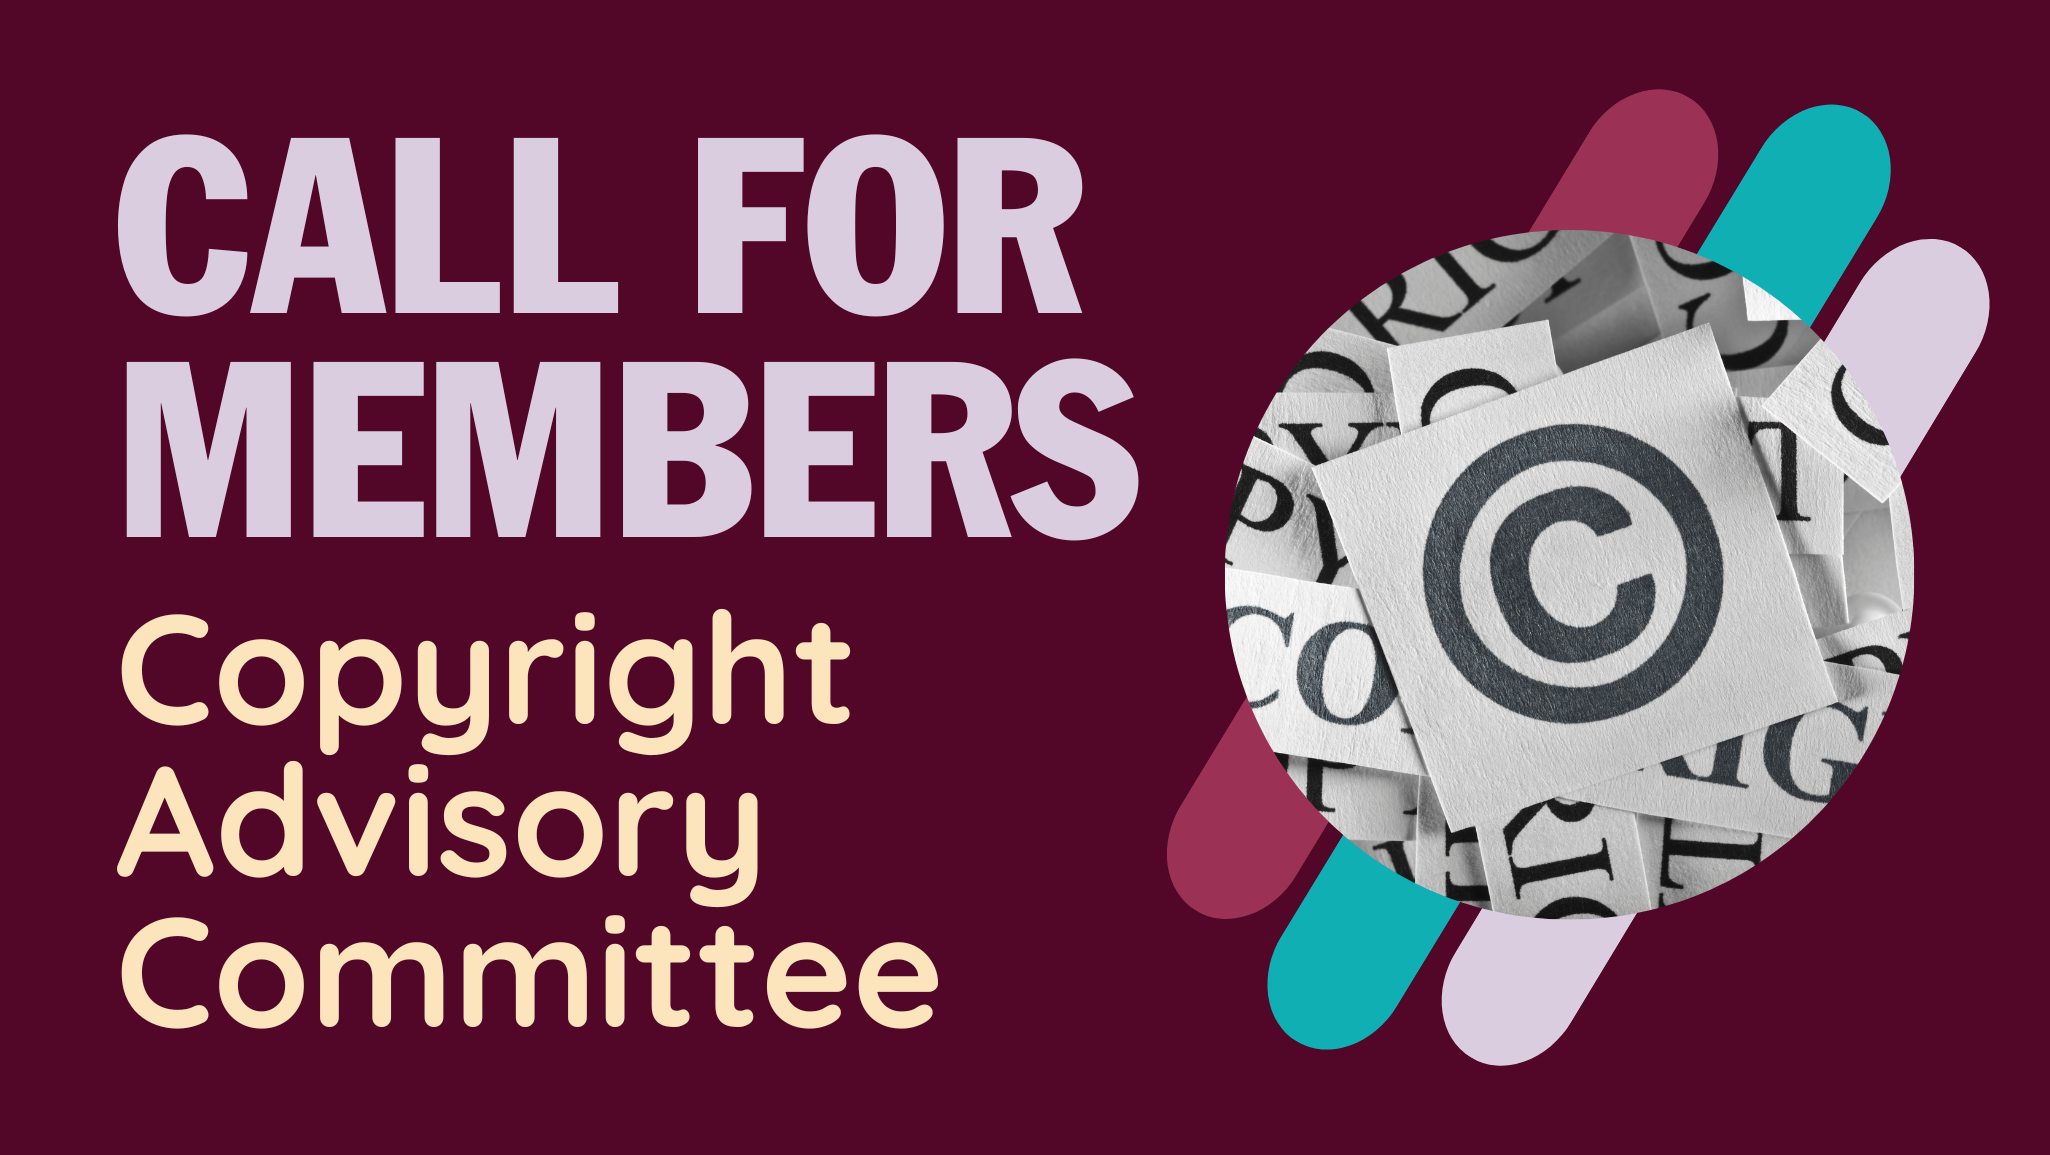 Call for Members: Copyright Advisory Committee